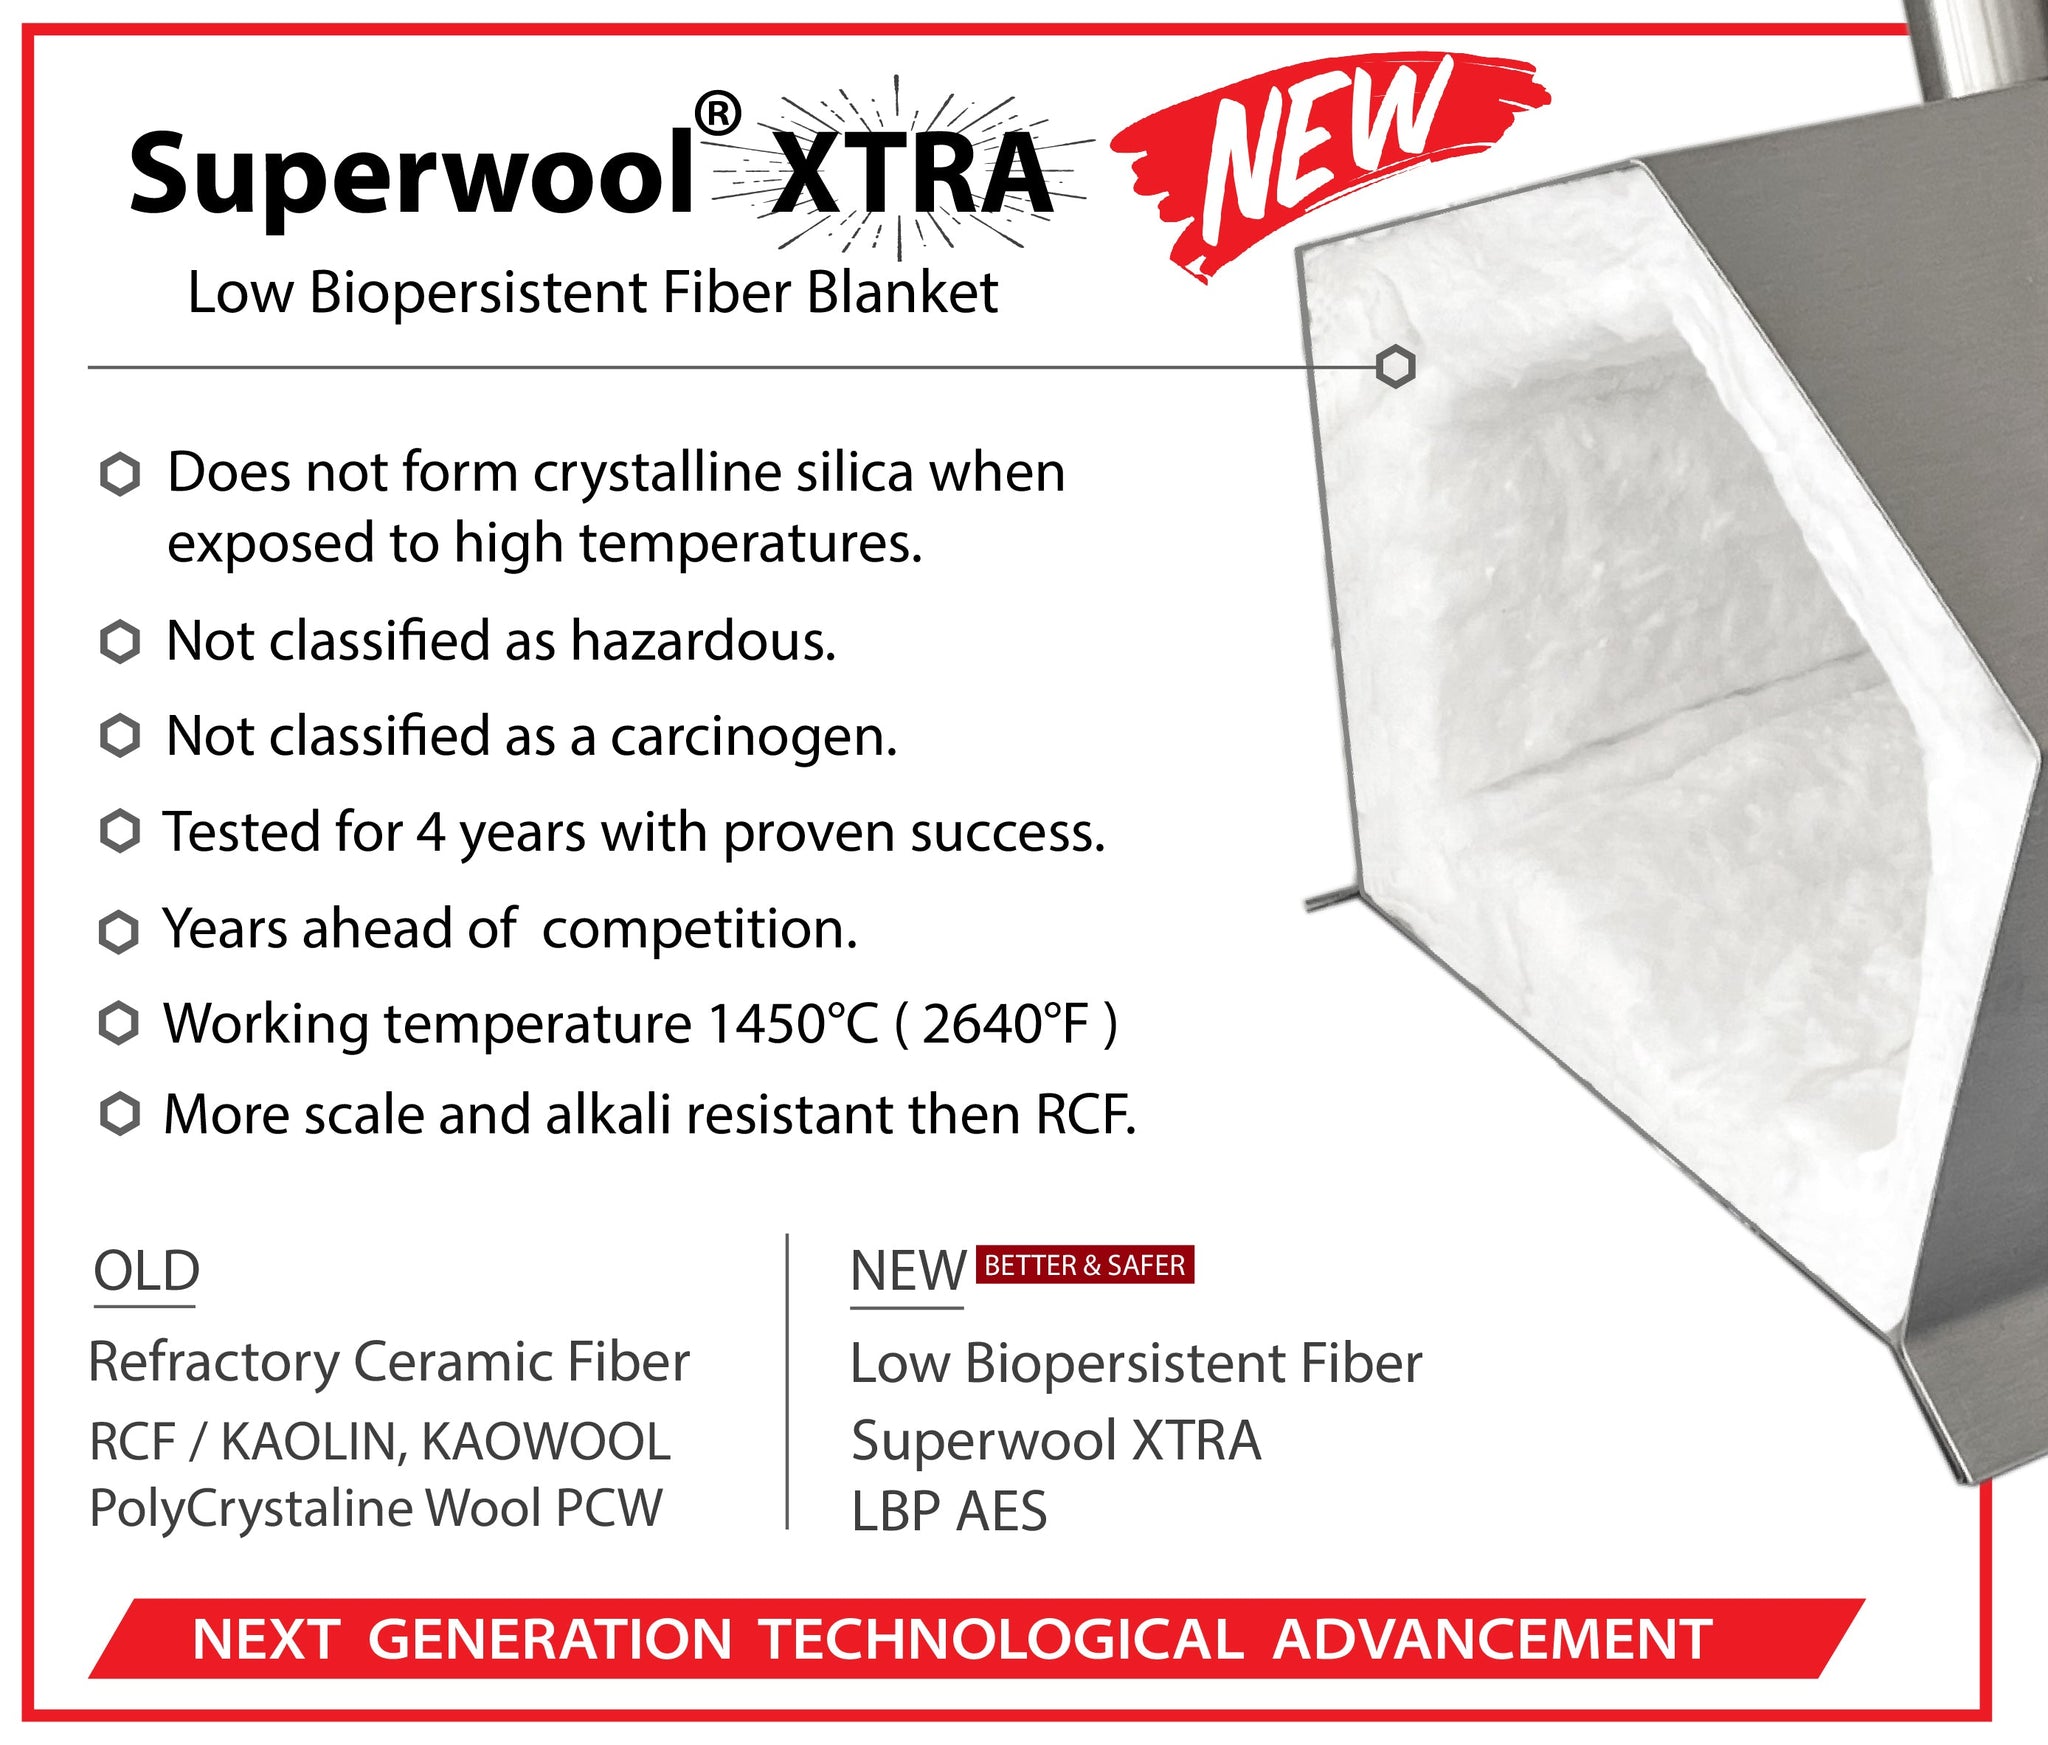 Mr Volcano Superwool Xtra Insulation Blanket for Hero 1 Forge | High Heat 2640°F | Next Generation Better Safer Insulation